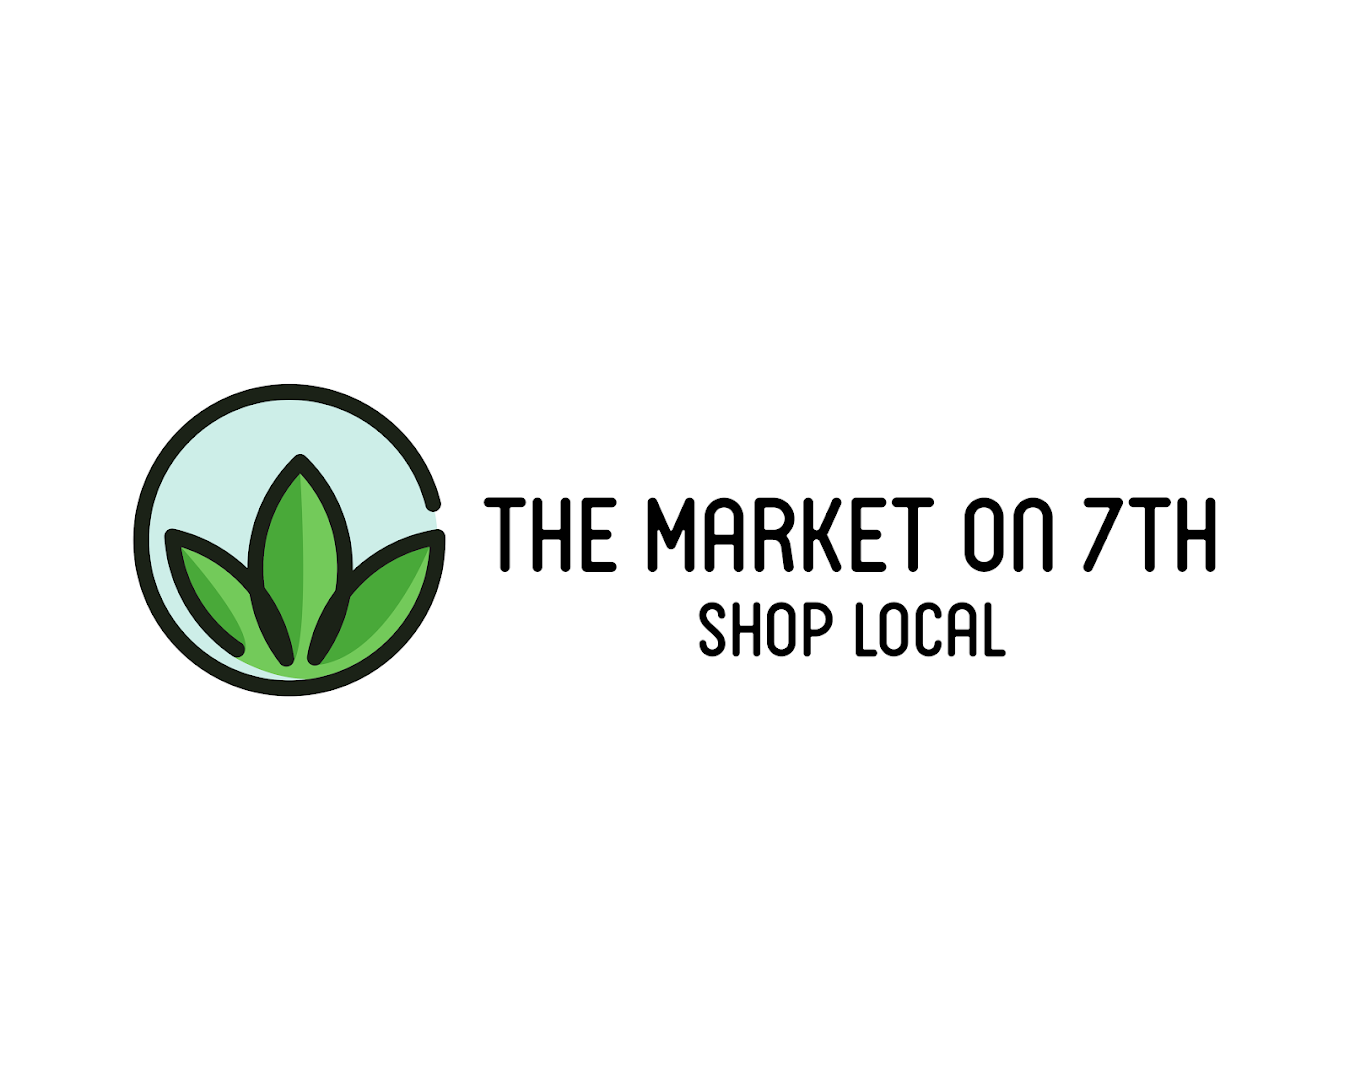 The Market On 7th